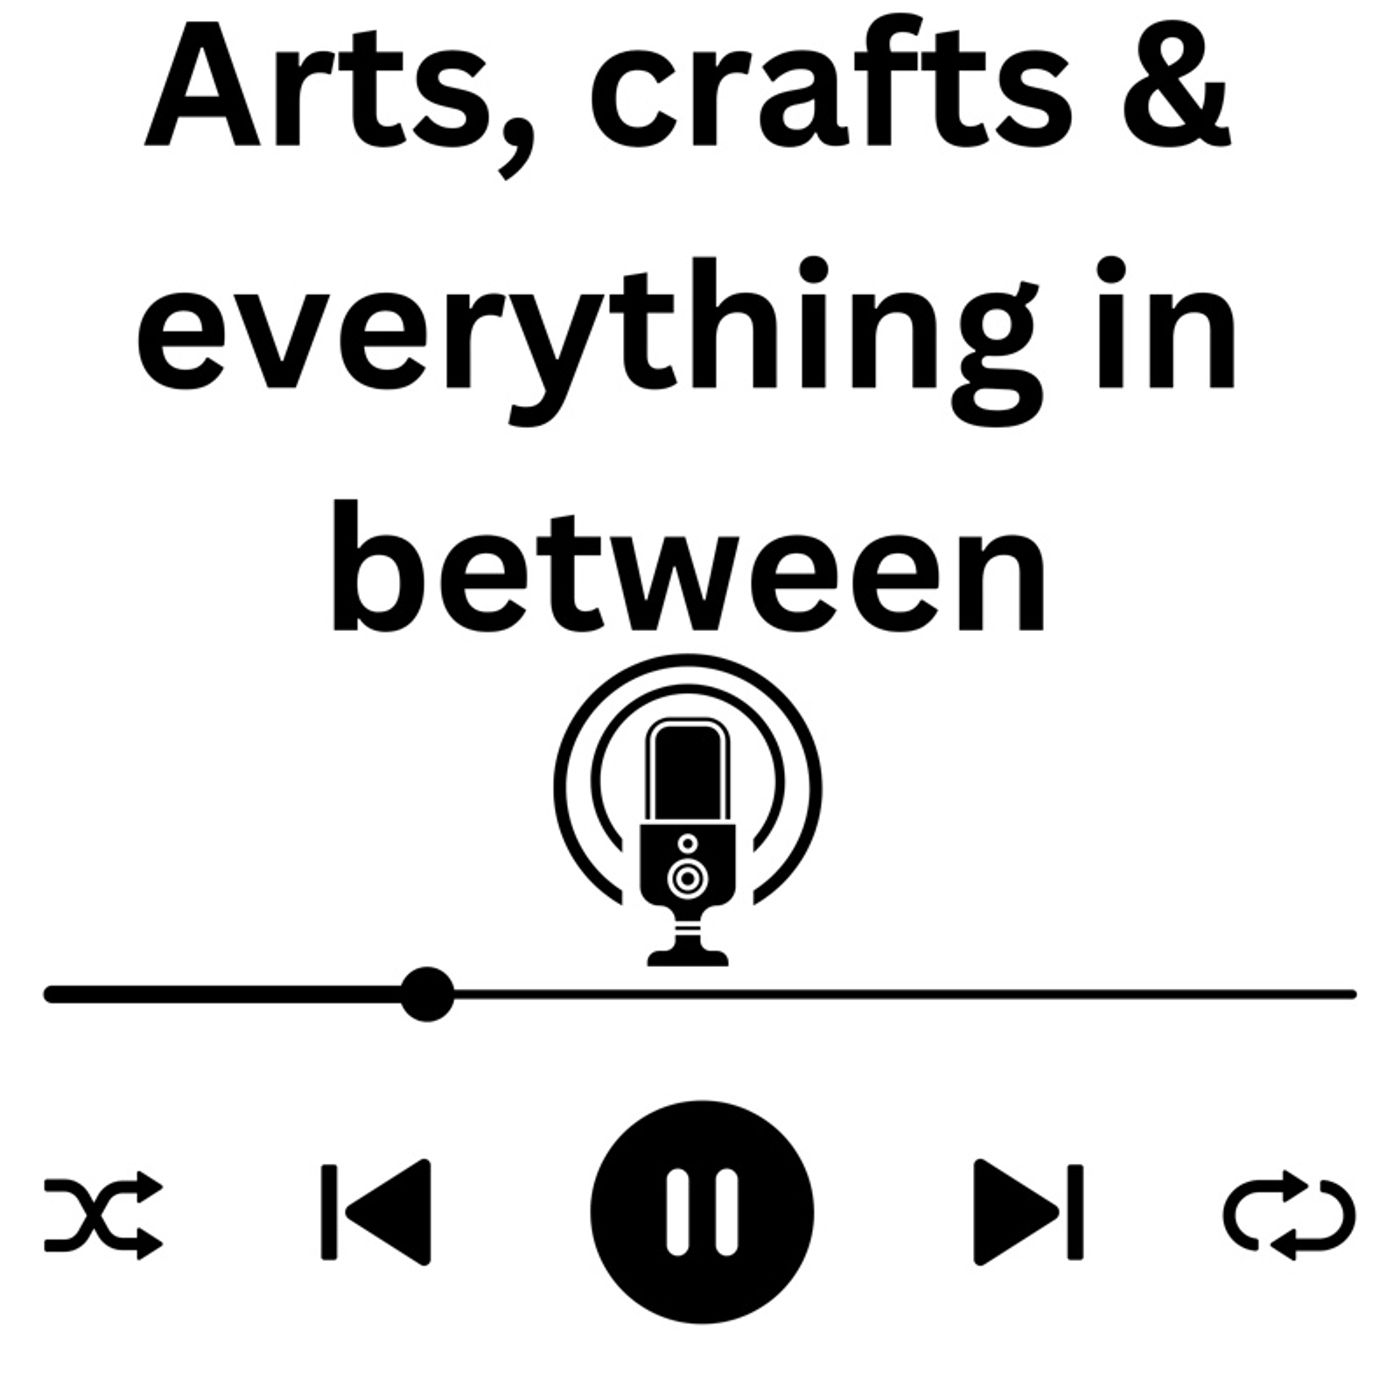 Episode 26 - Arts, crafts & everything In between.